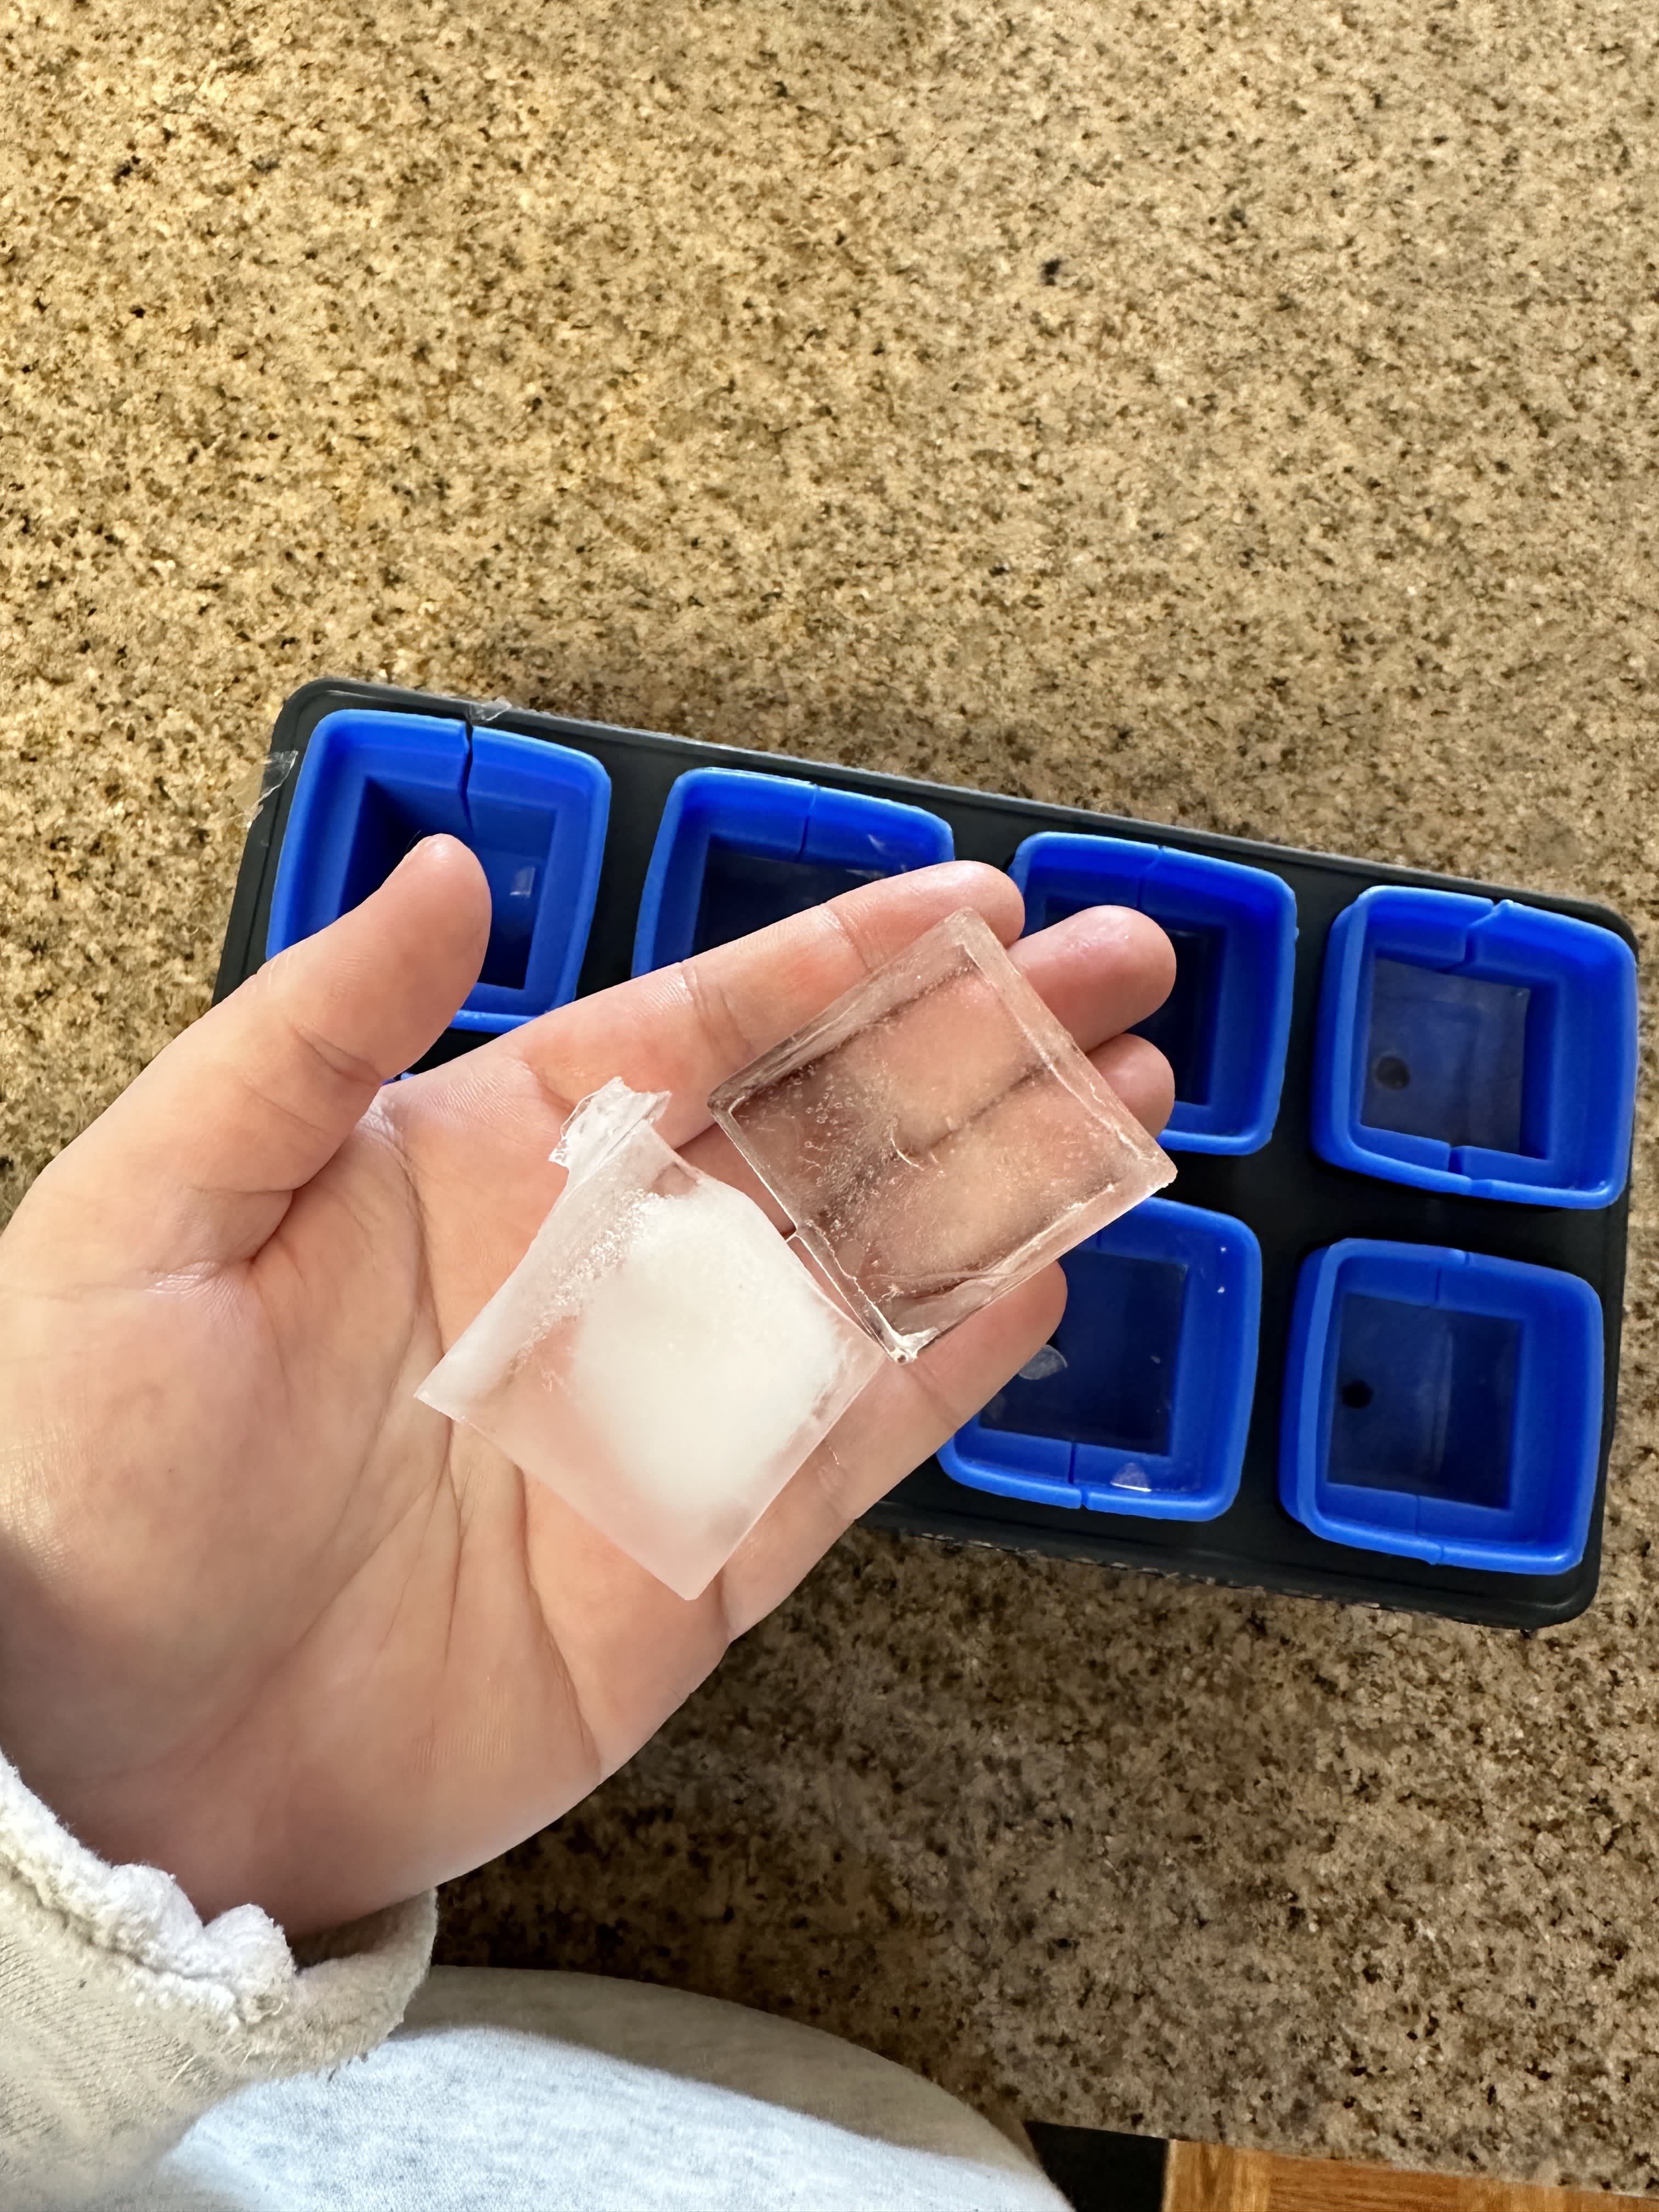 Dexas Ice-Ology Silicone Clear Ice Maker Tray Review 2023